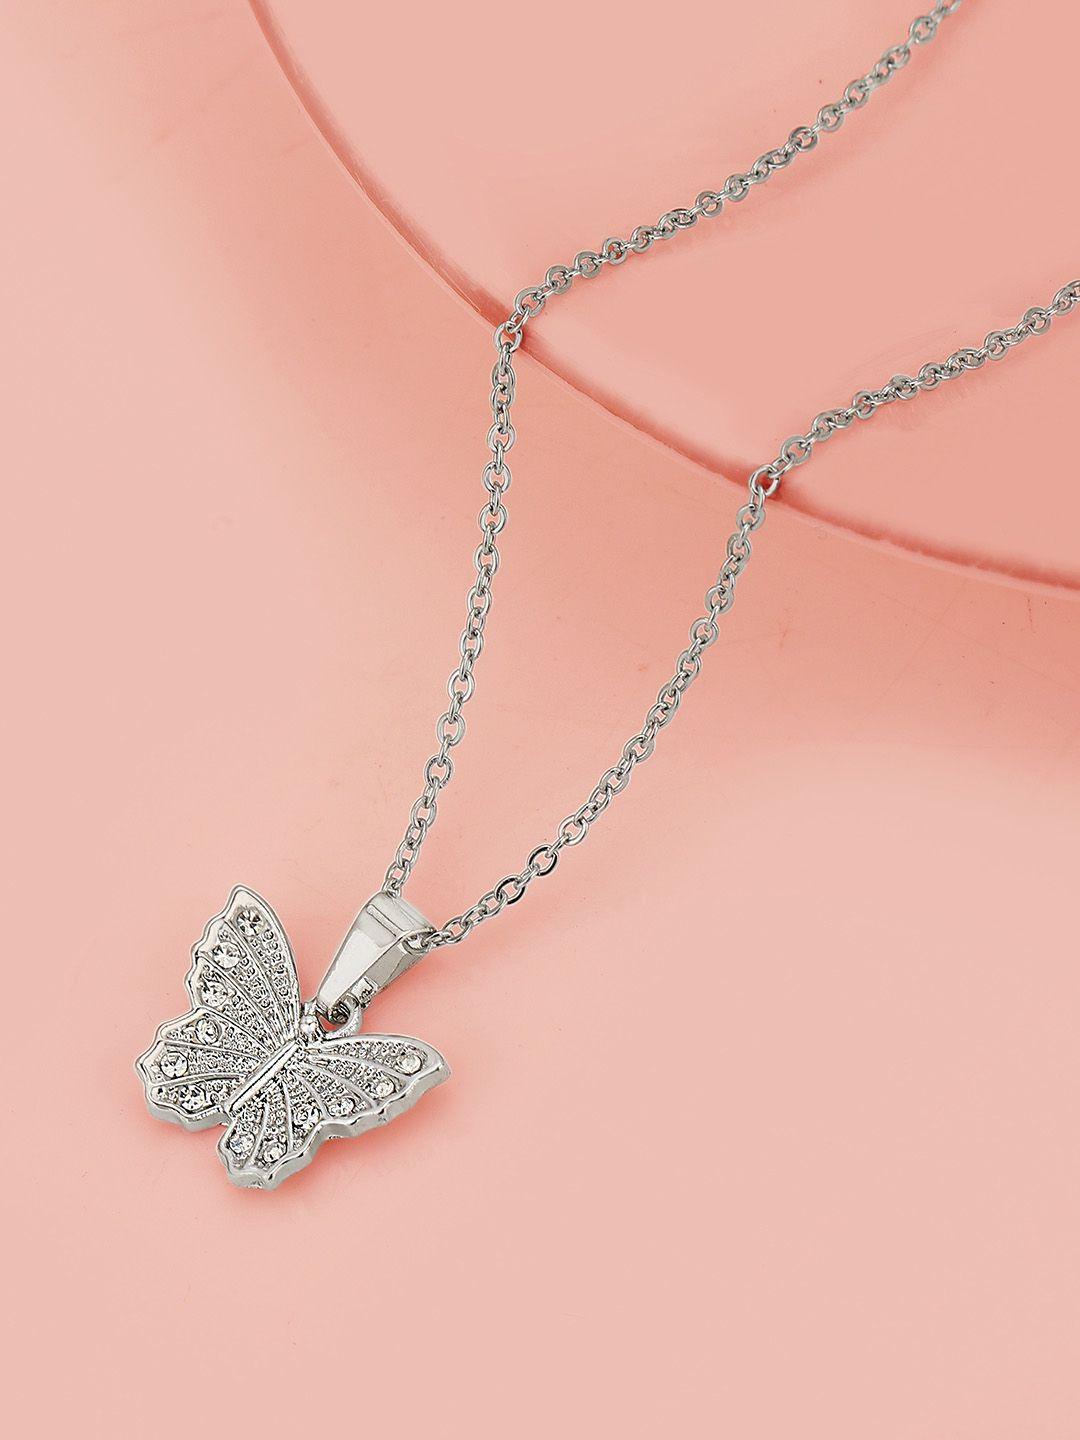 carlton-london-rhodium-plated-cz-studded-butterfly-pendant-with-chain